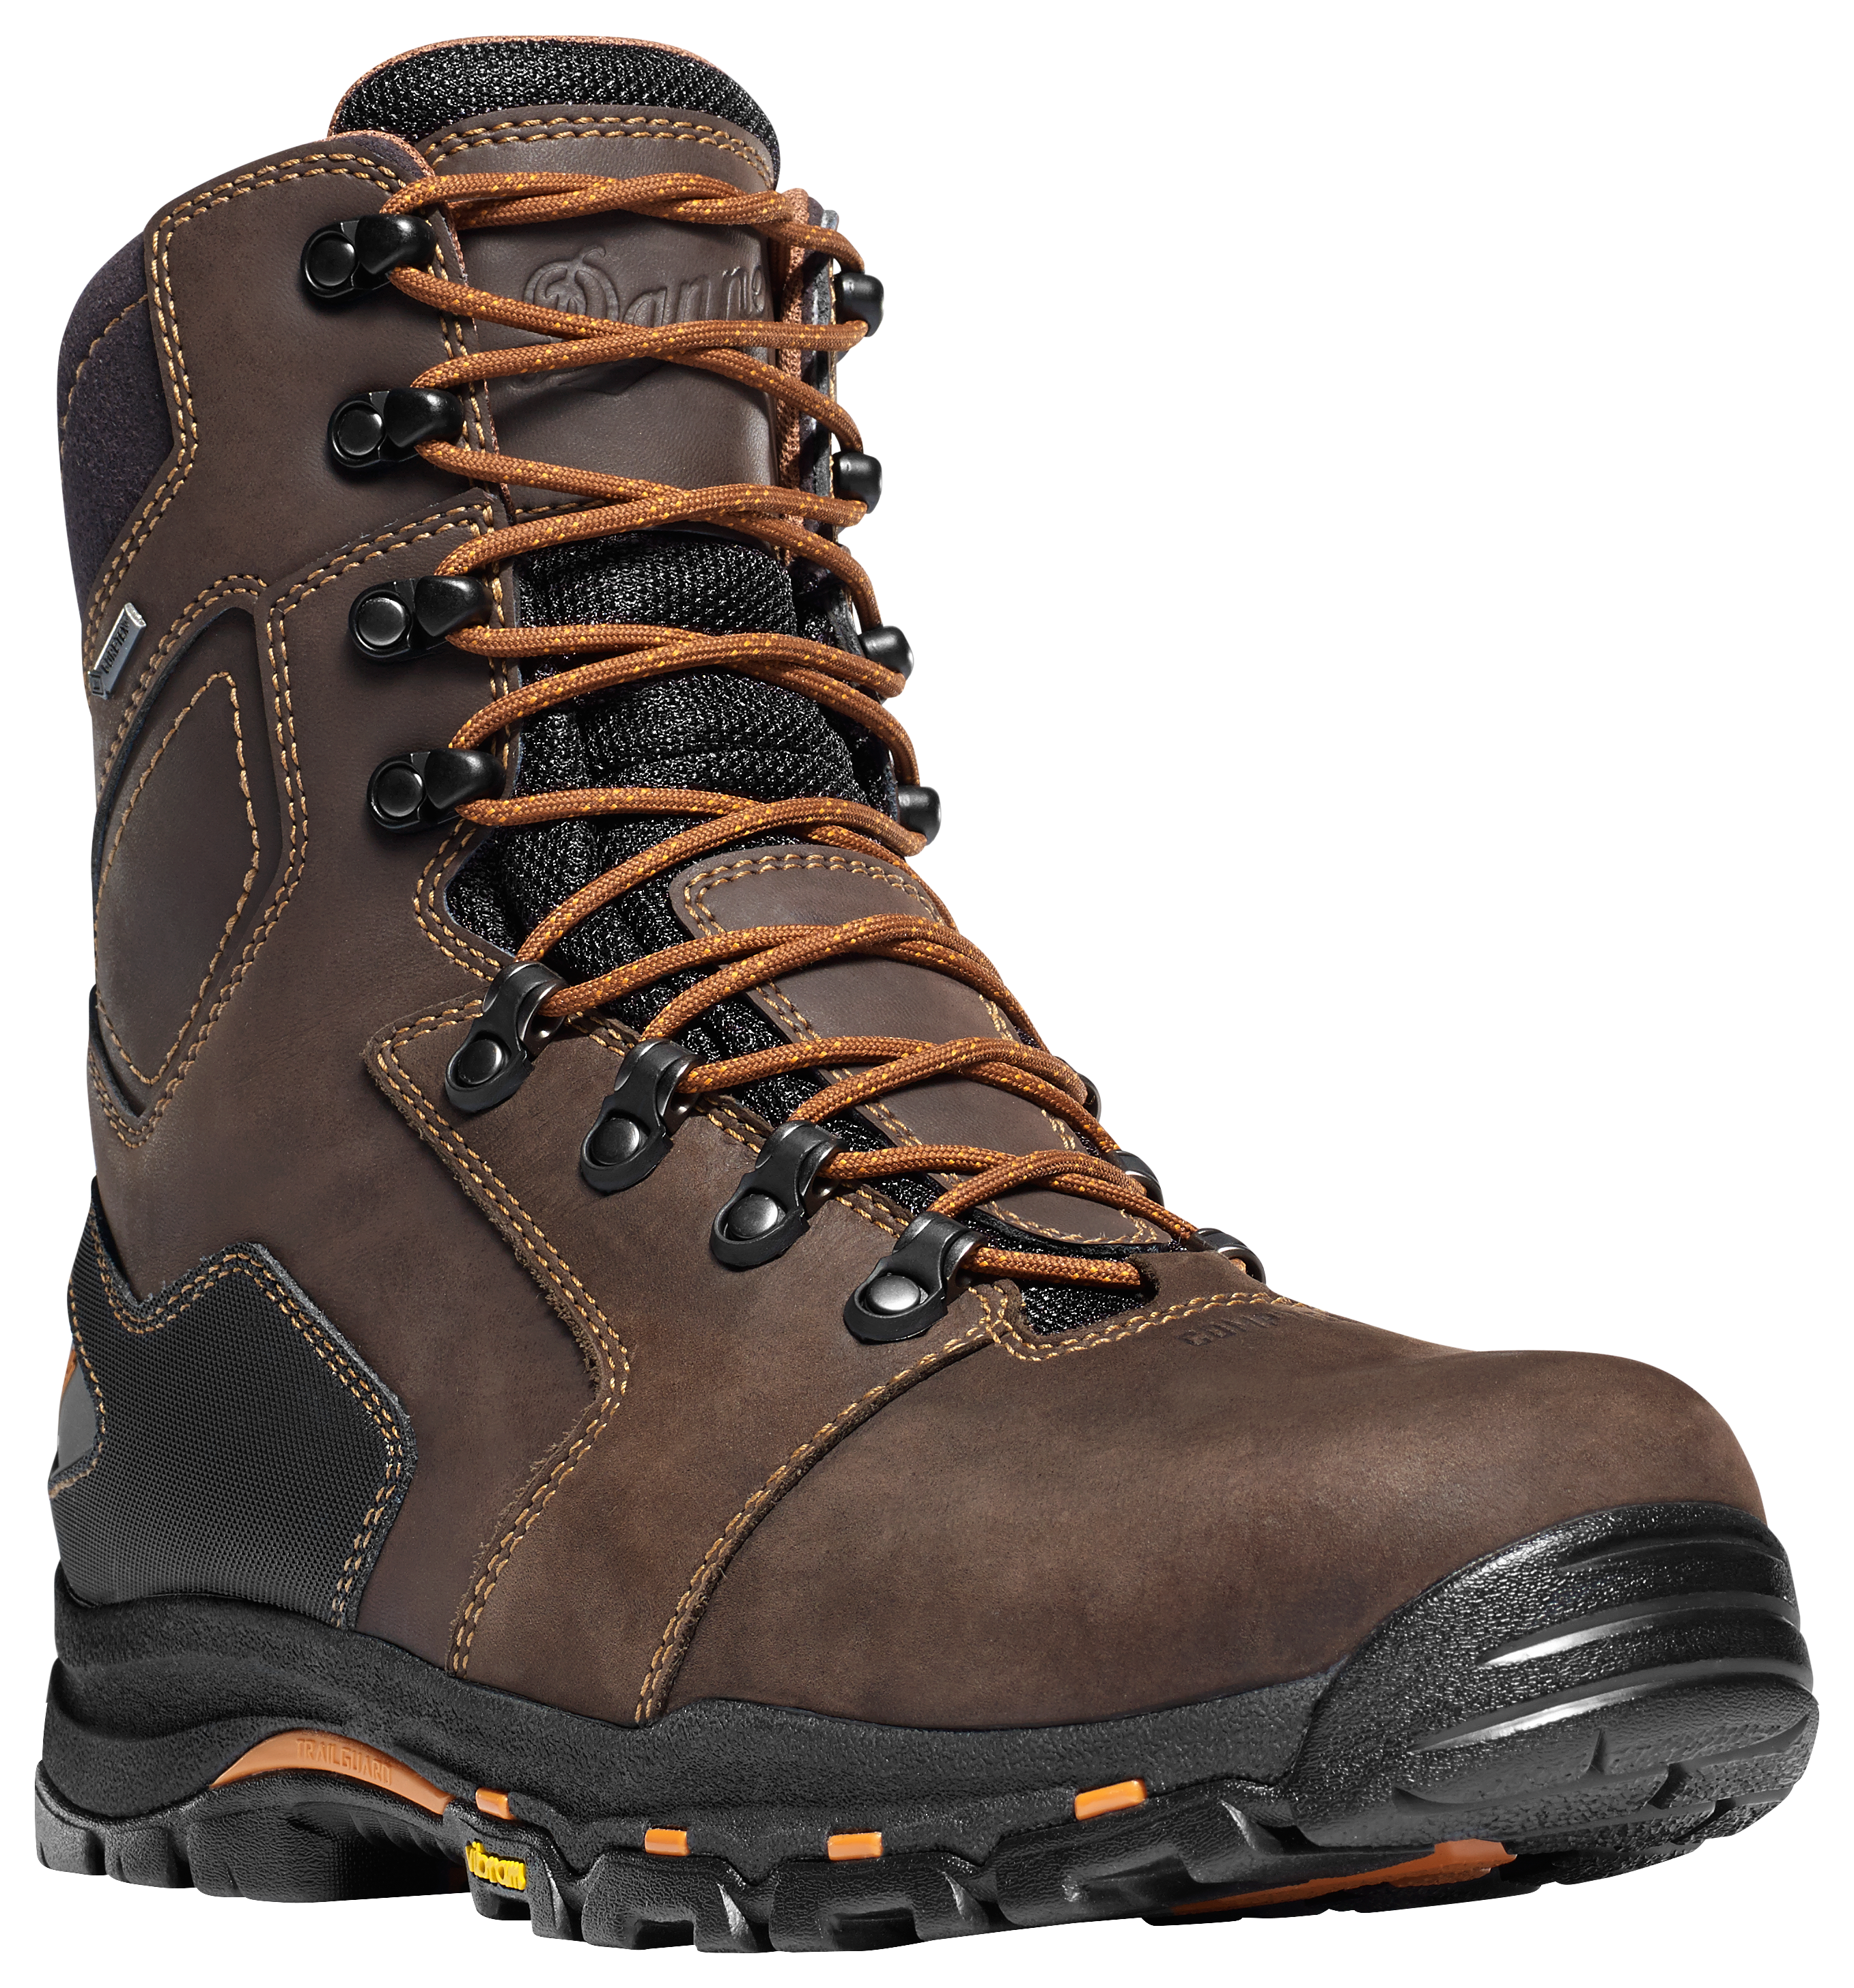 Danner Vicious GORE-TEX Composite Toe Work Boots for Men - Brown - 9.5W